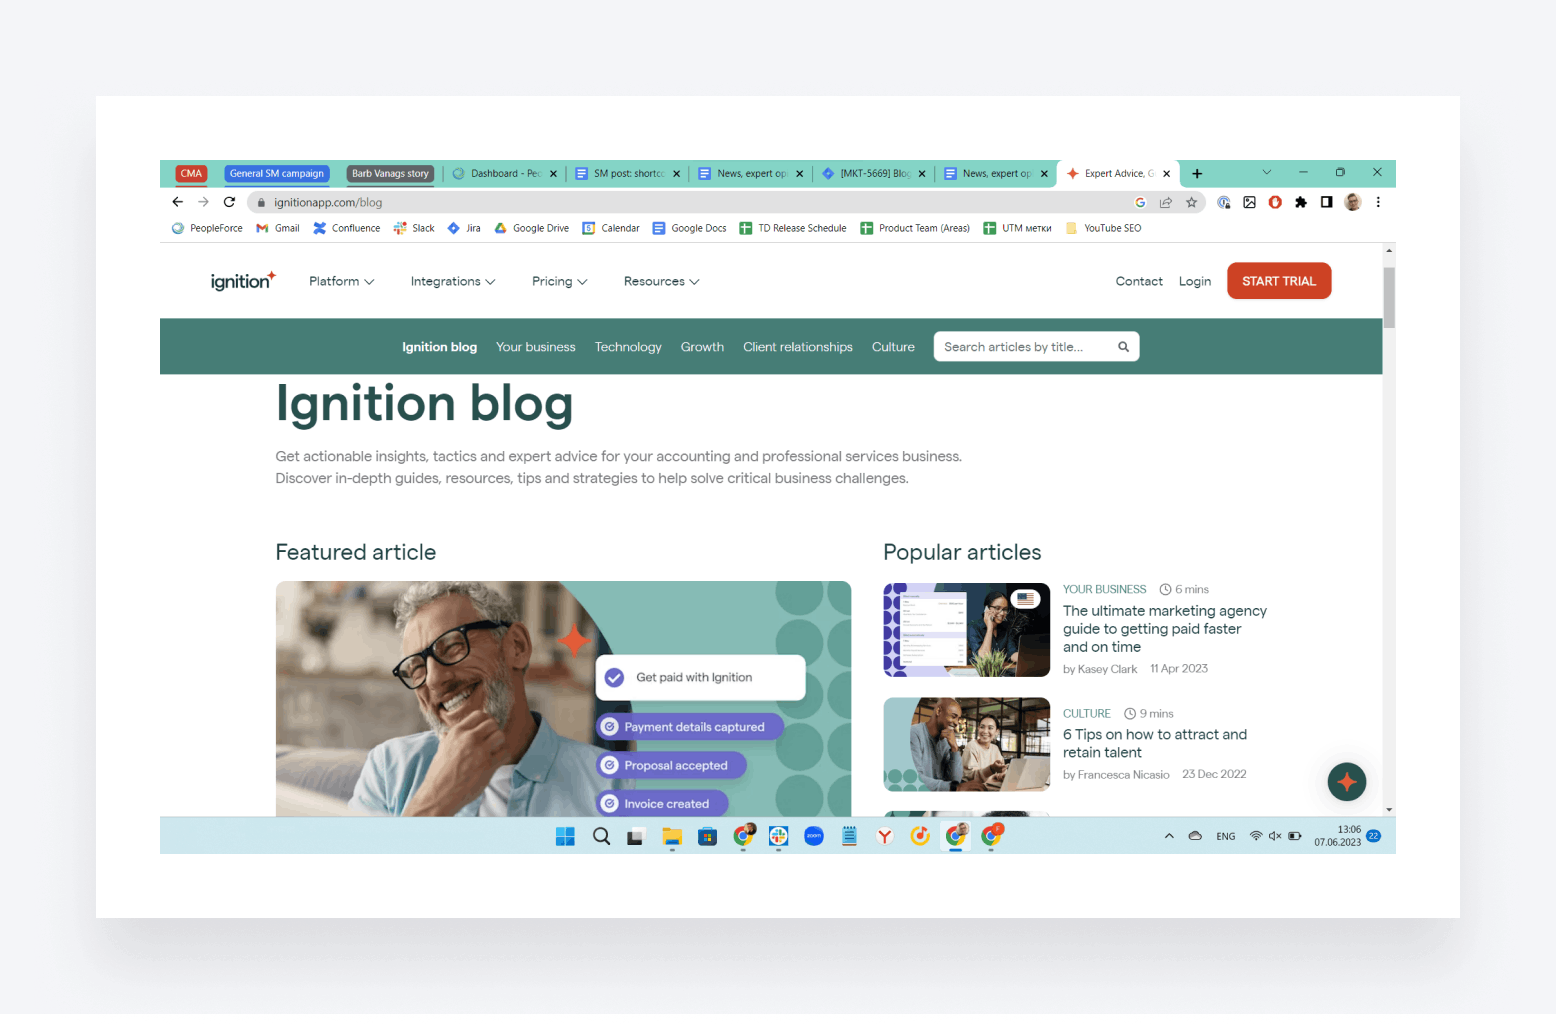 Ignition blog page